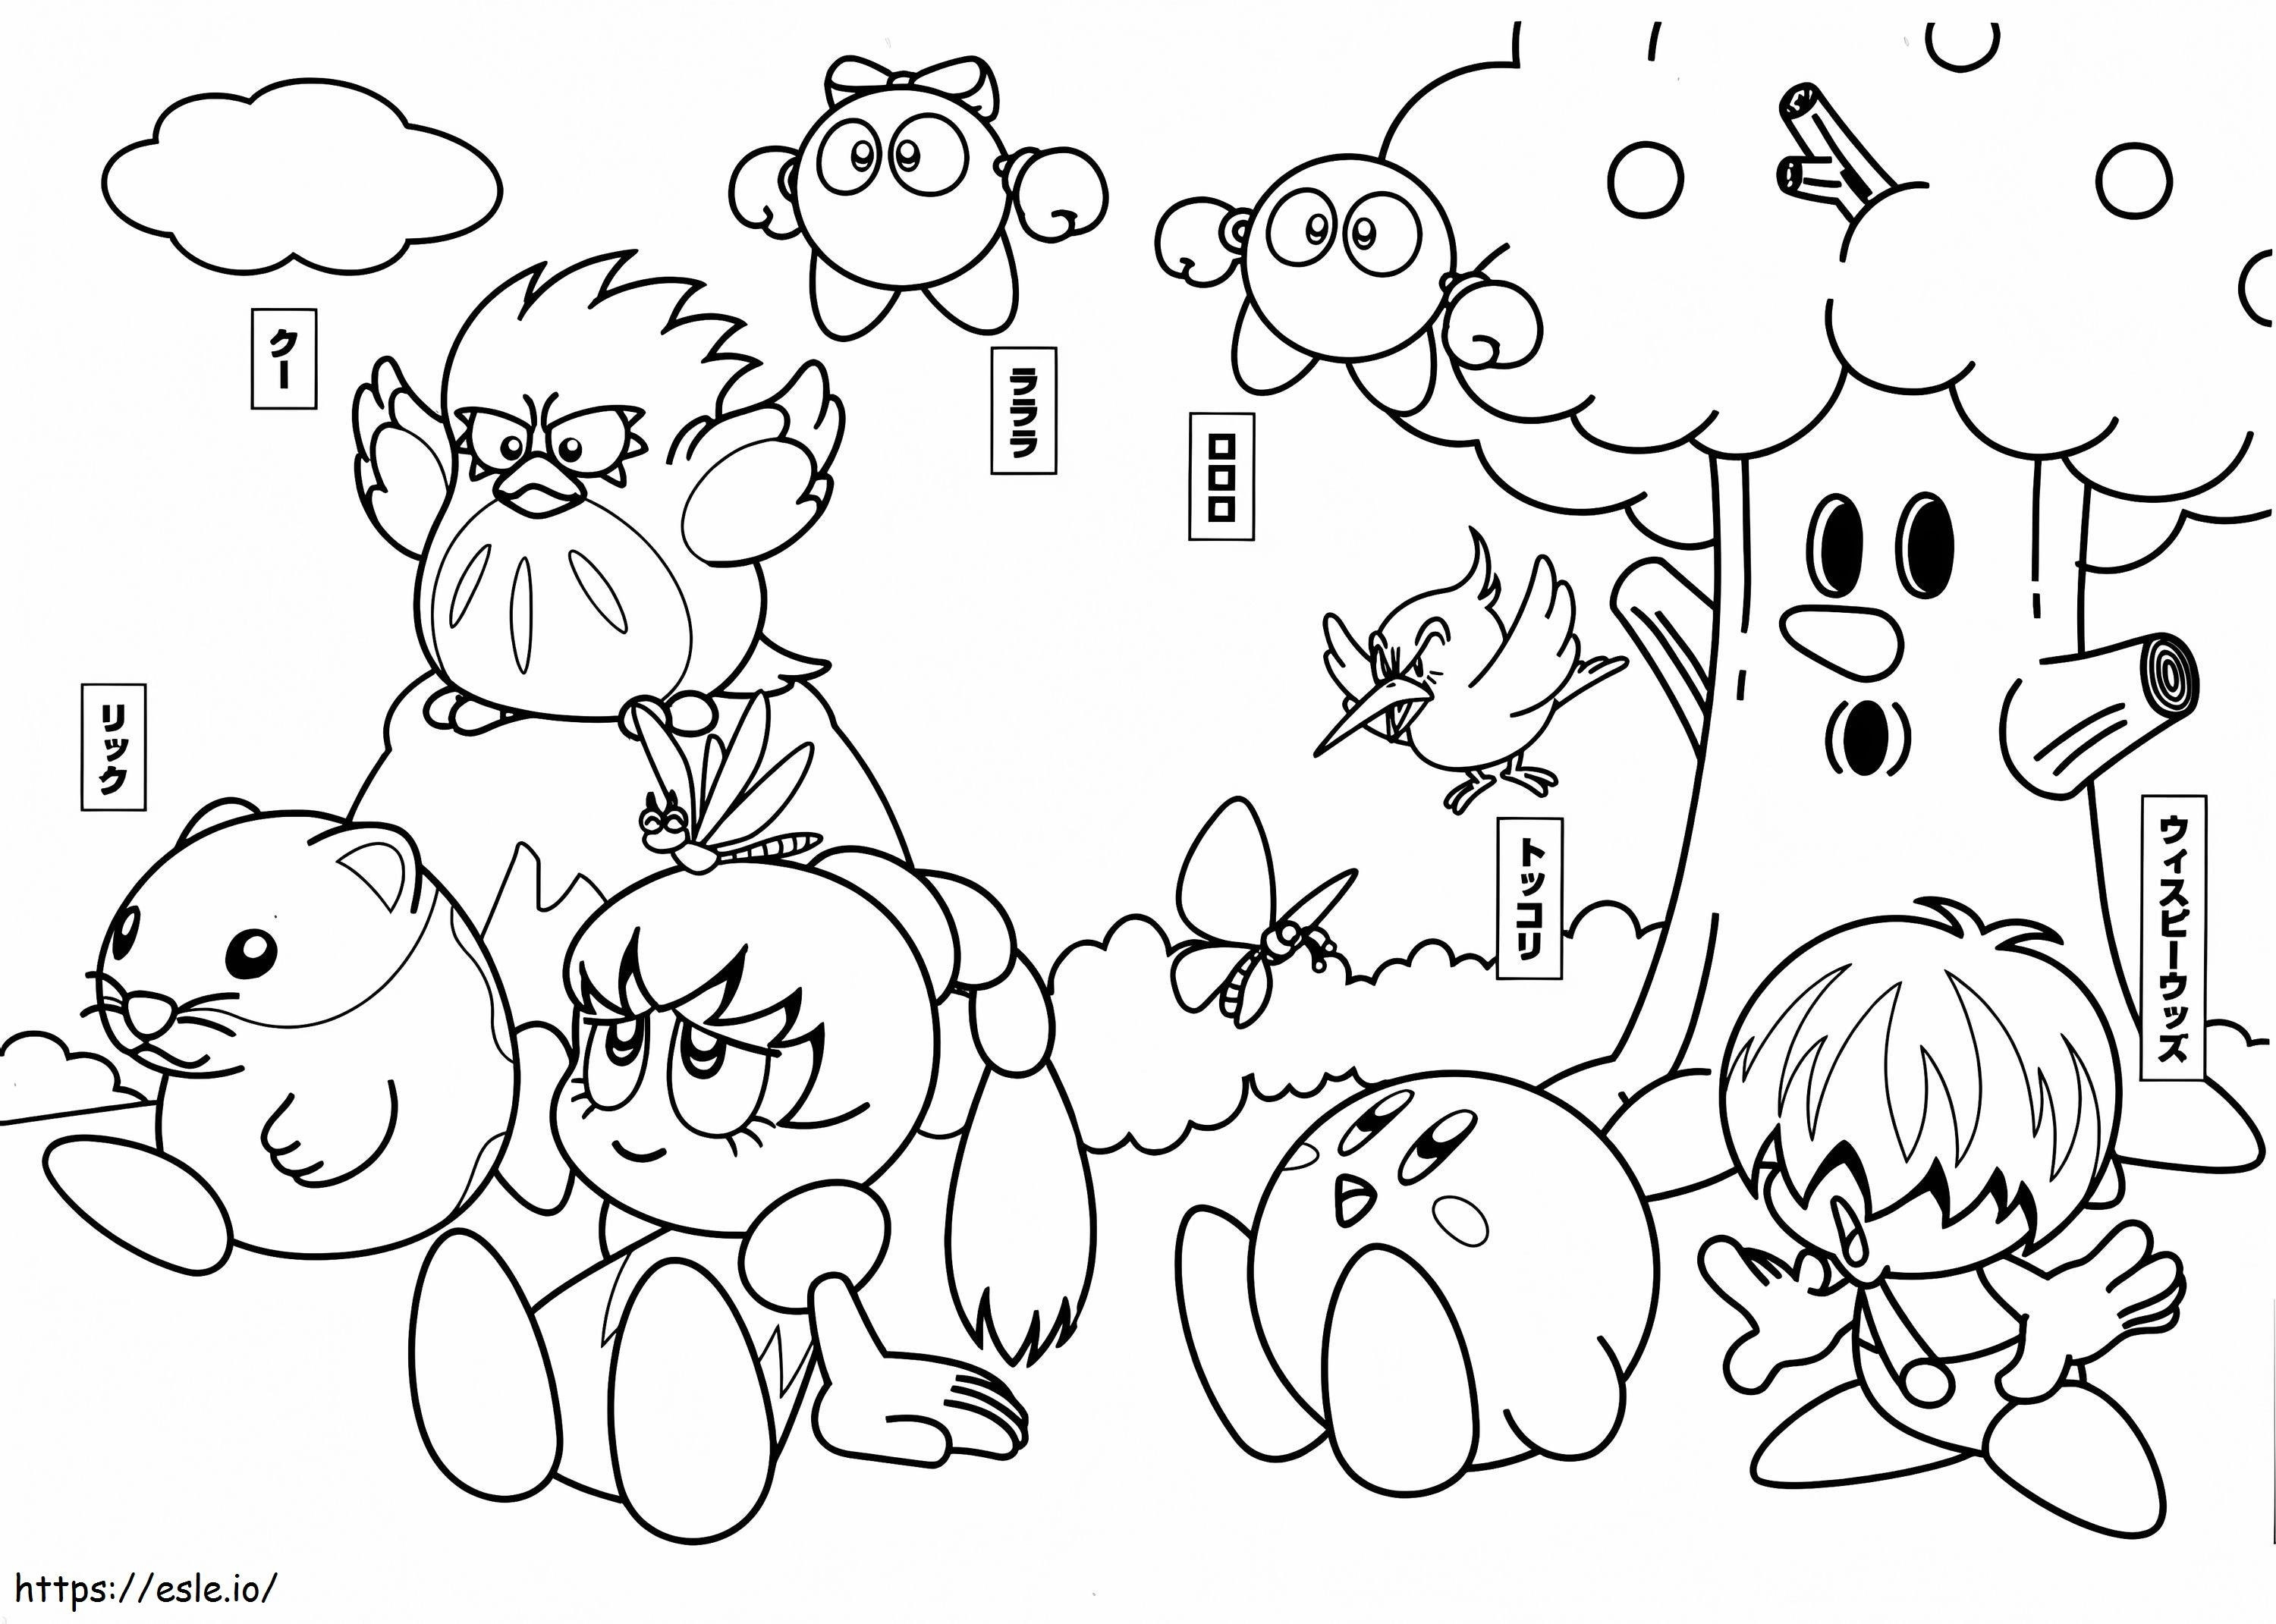 Kirby With Friends coloring page